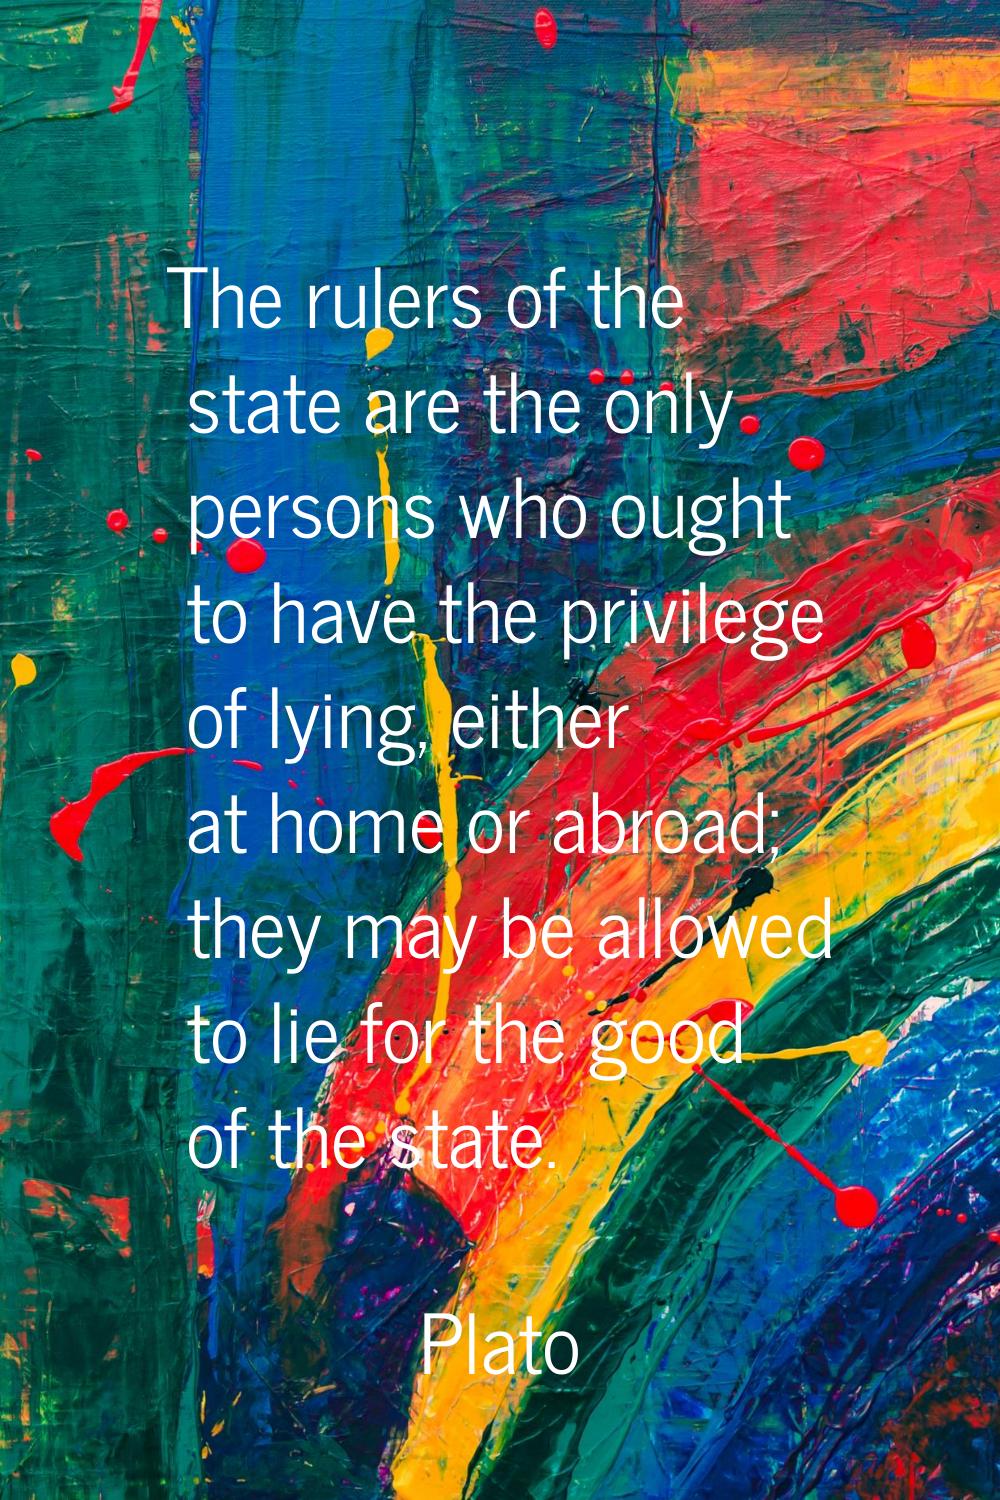 The rulers of the state are the only persons who ought to have the privilege of lying, either at ho